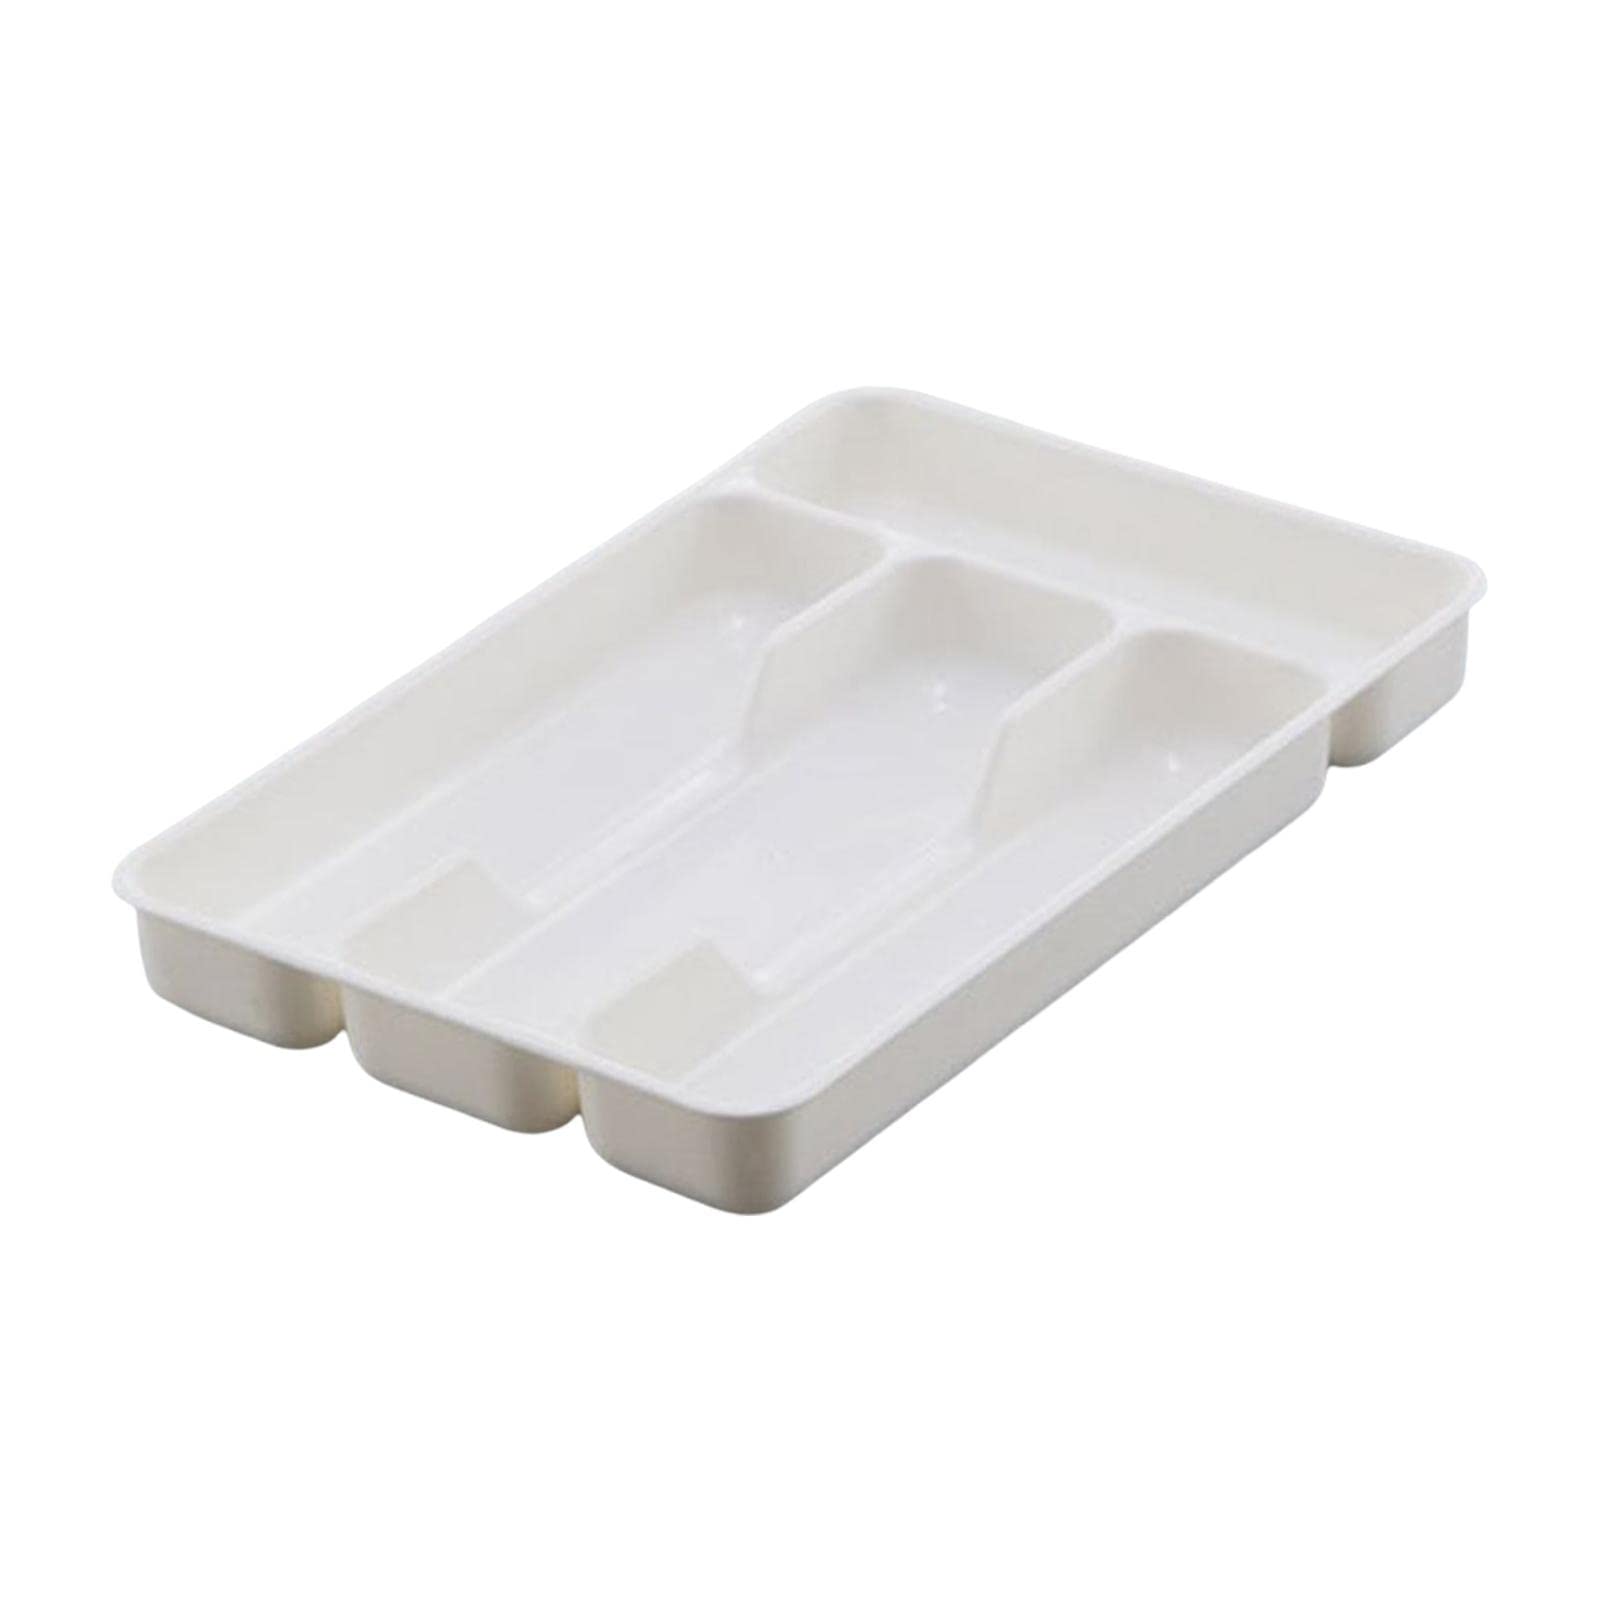 Bothyi Cutlery Tray Fittings Multipurpose Organizer with 4 Compartments Cutlery Storage Box Durable for Office Kitchen Tableware Drawer Silverware, White